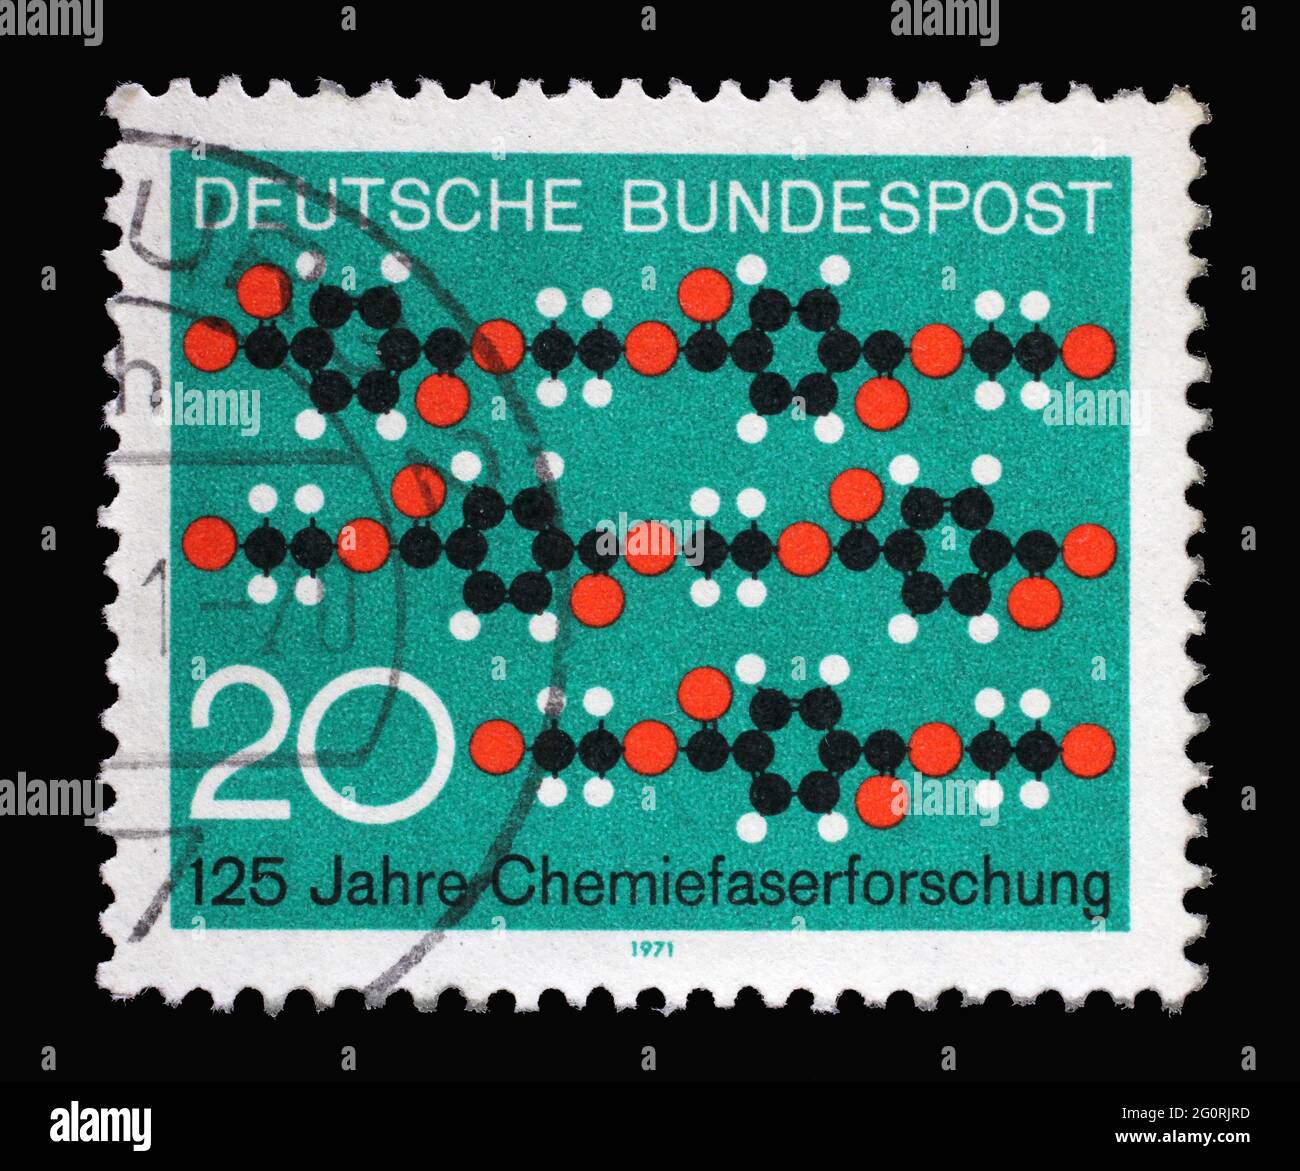 Stamp printed in Germany showing a picture with chain molecules, 125 years of chemical fiber research, circa 1971 Stock Photo